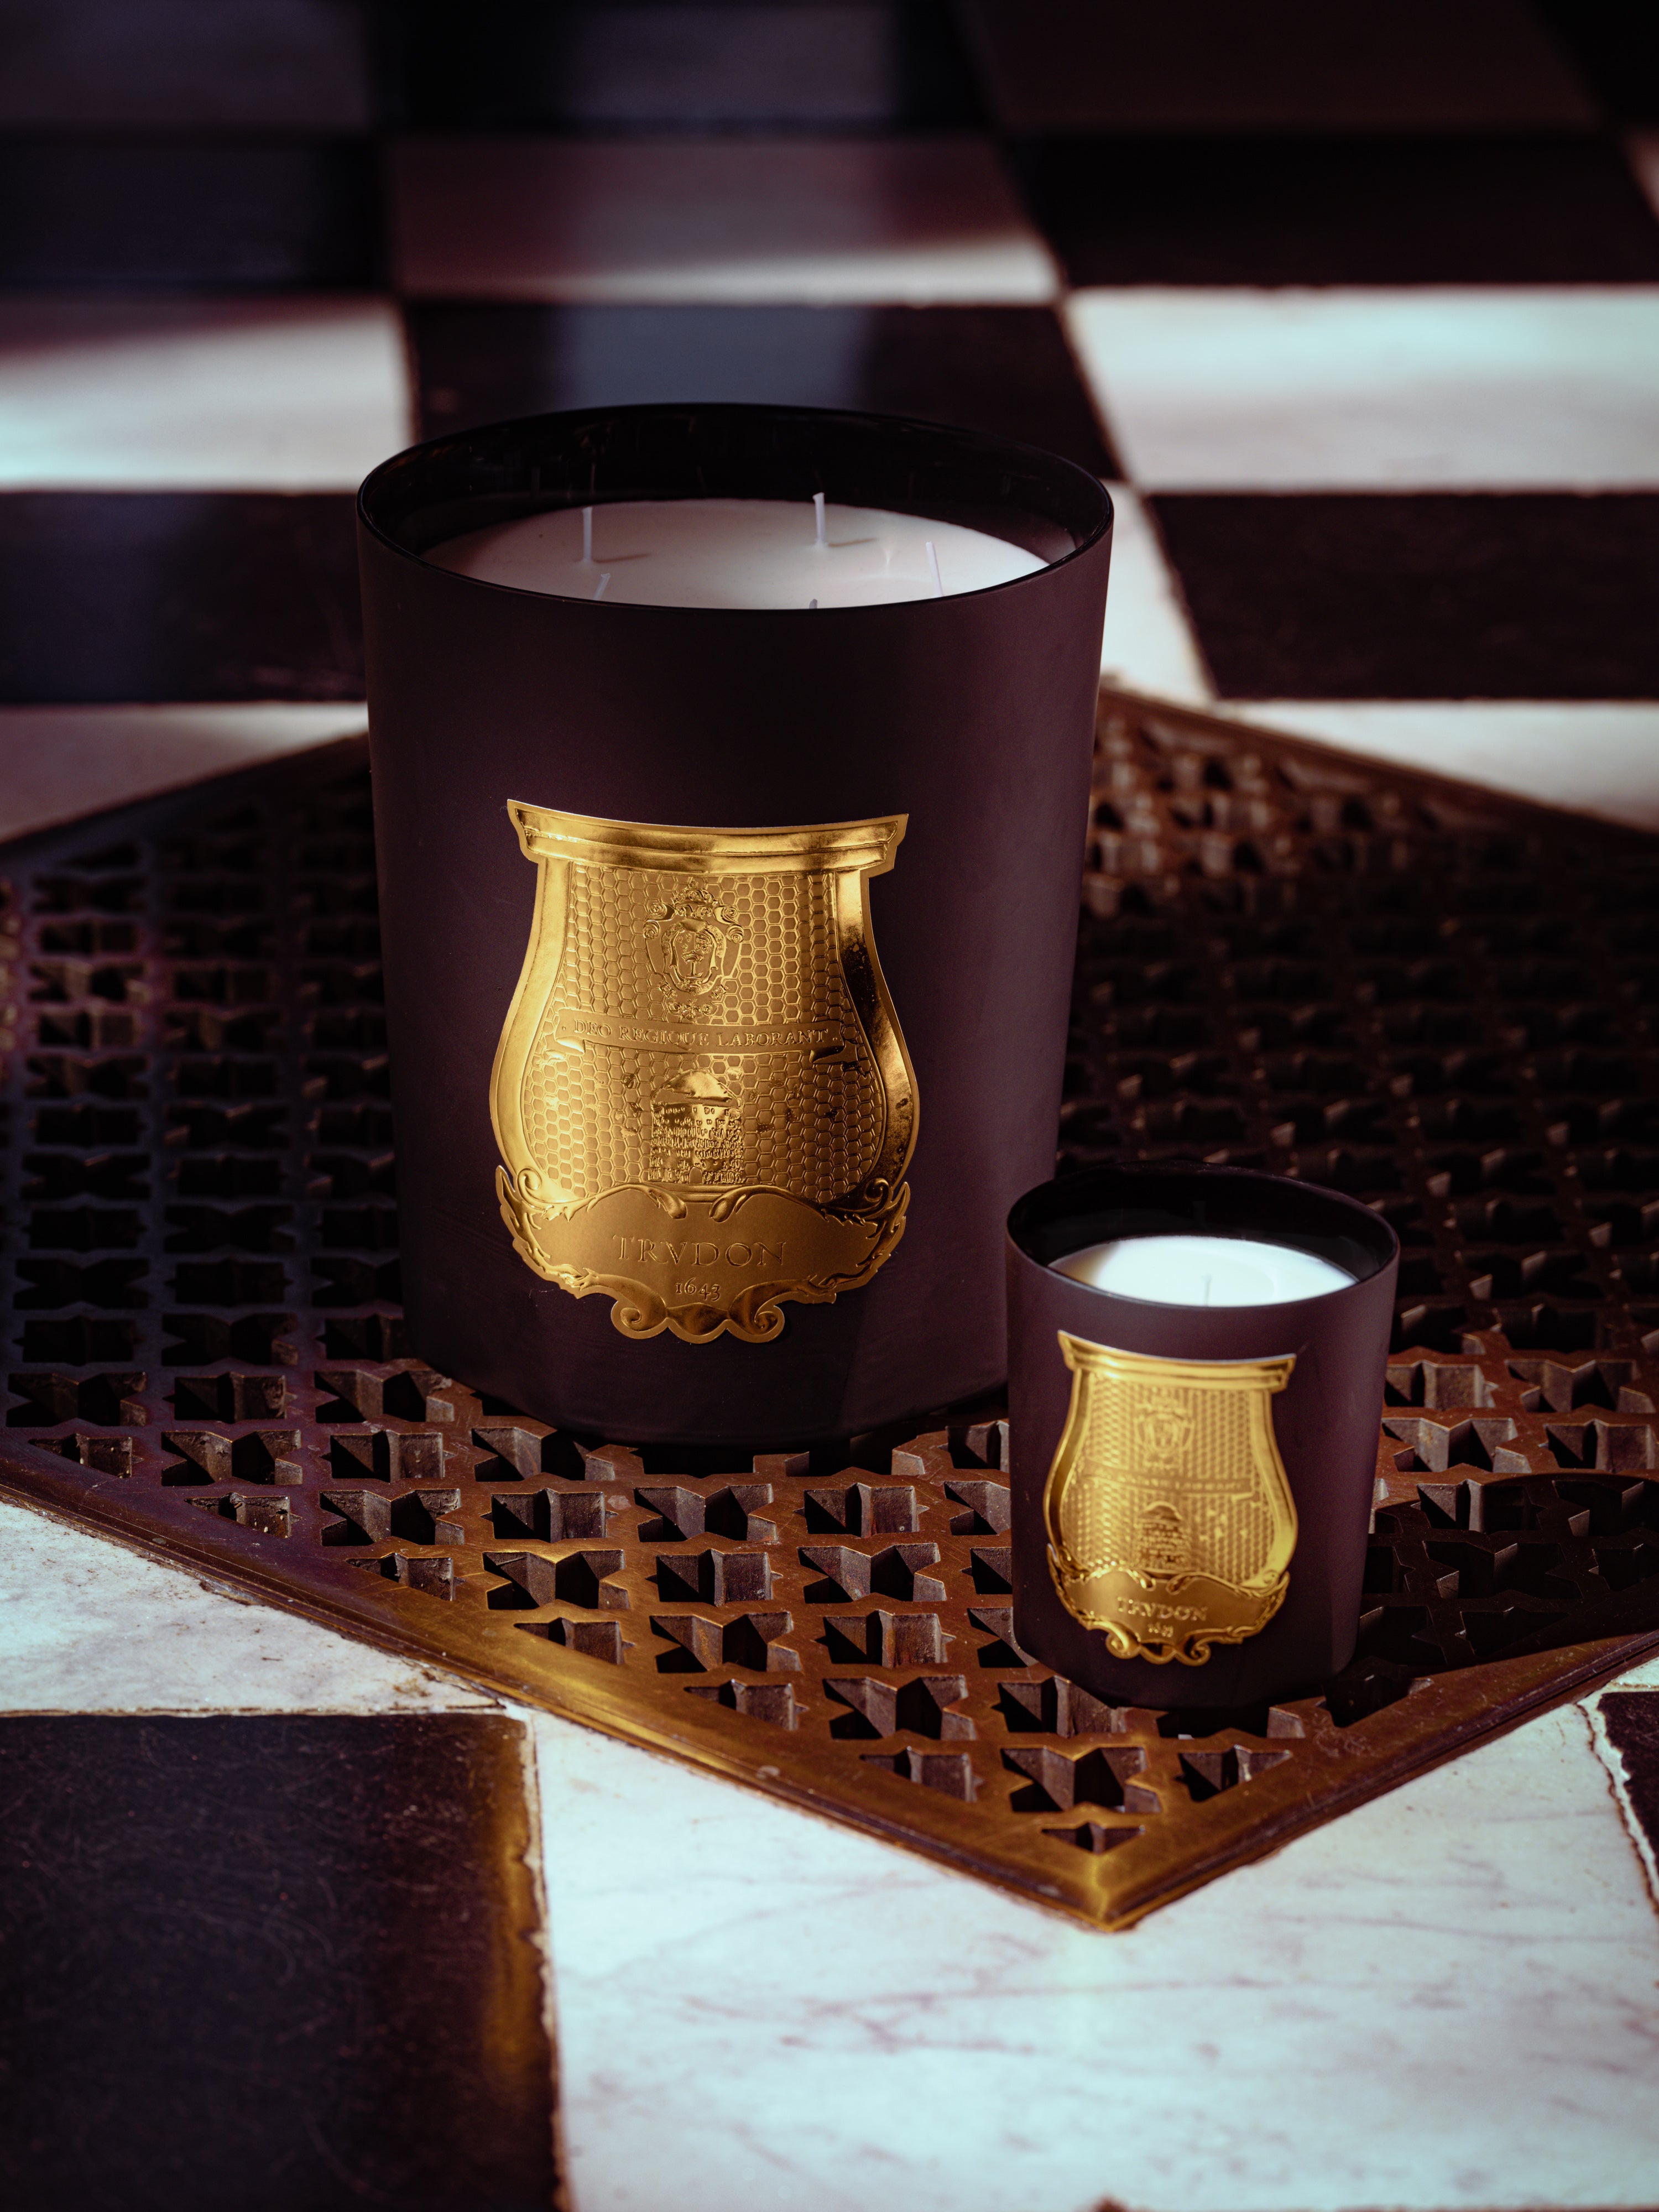 CIRE TRUDON CANDLE 270g Mary Limited Edition